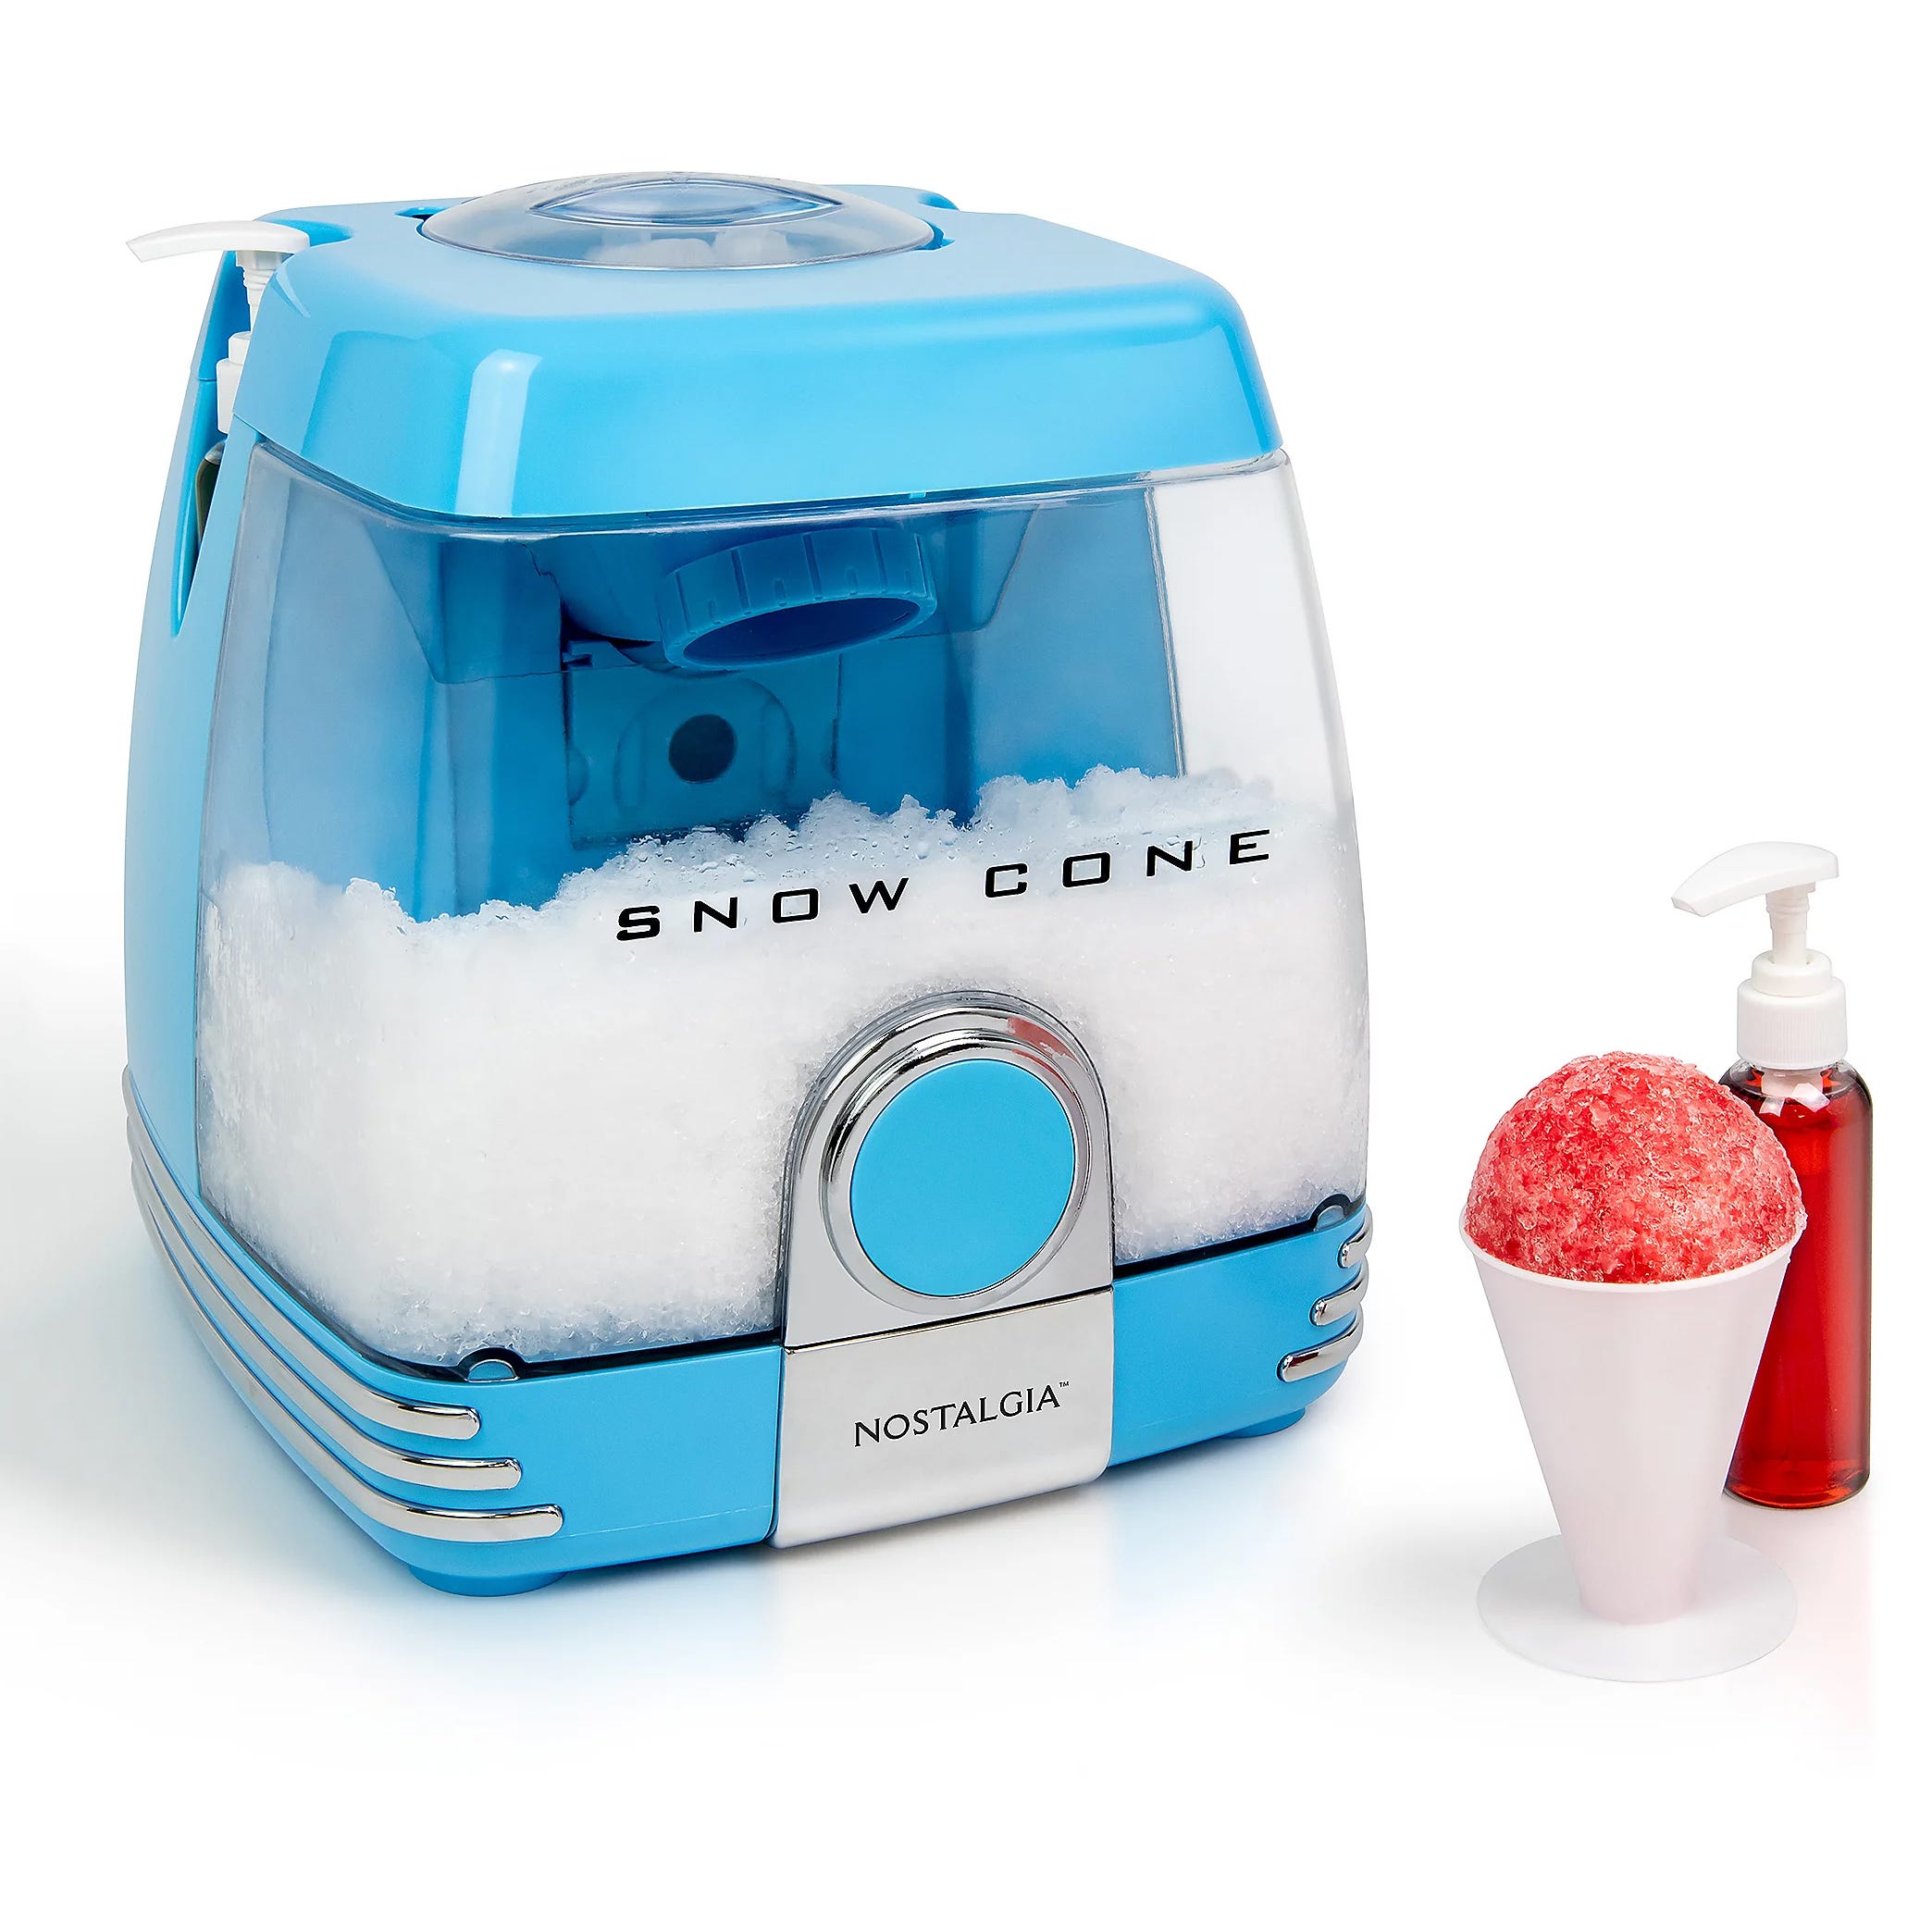 A blue and white snow cone machine next to a red syrup bottle and a snow cone in a white cup.